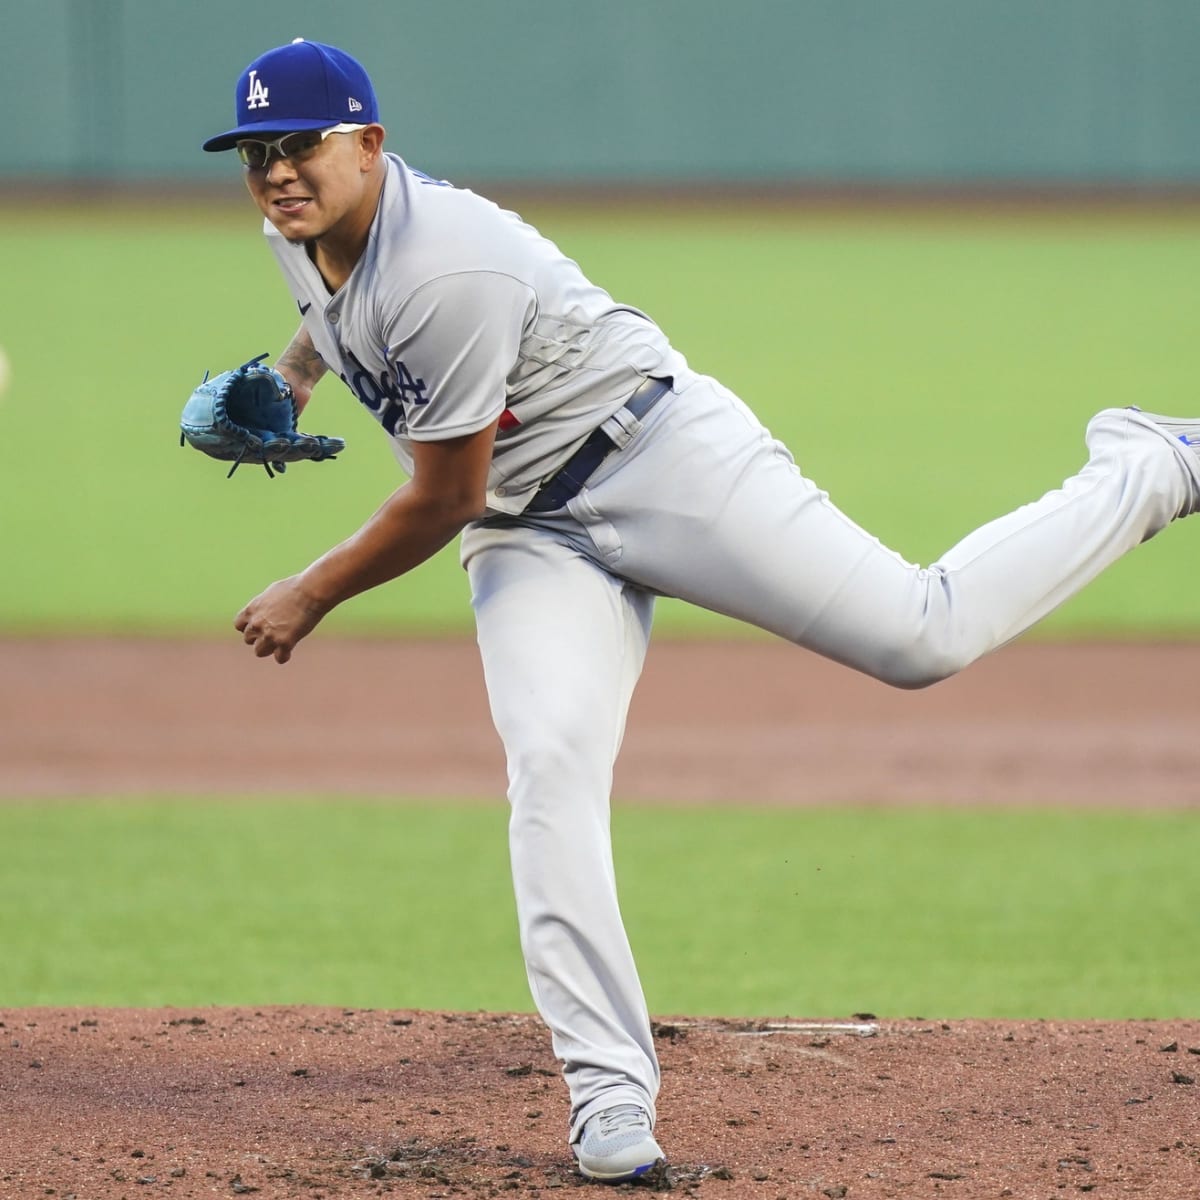 Dodgers: this is the luxury team that will accompany Julio Urias